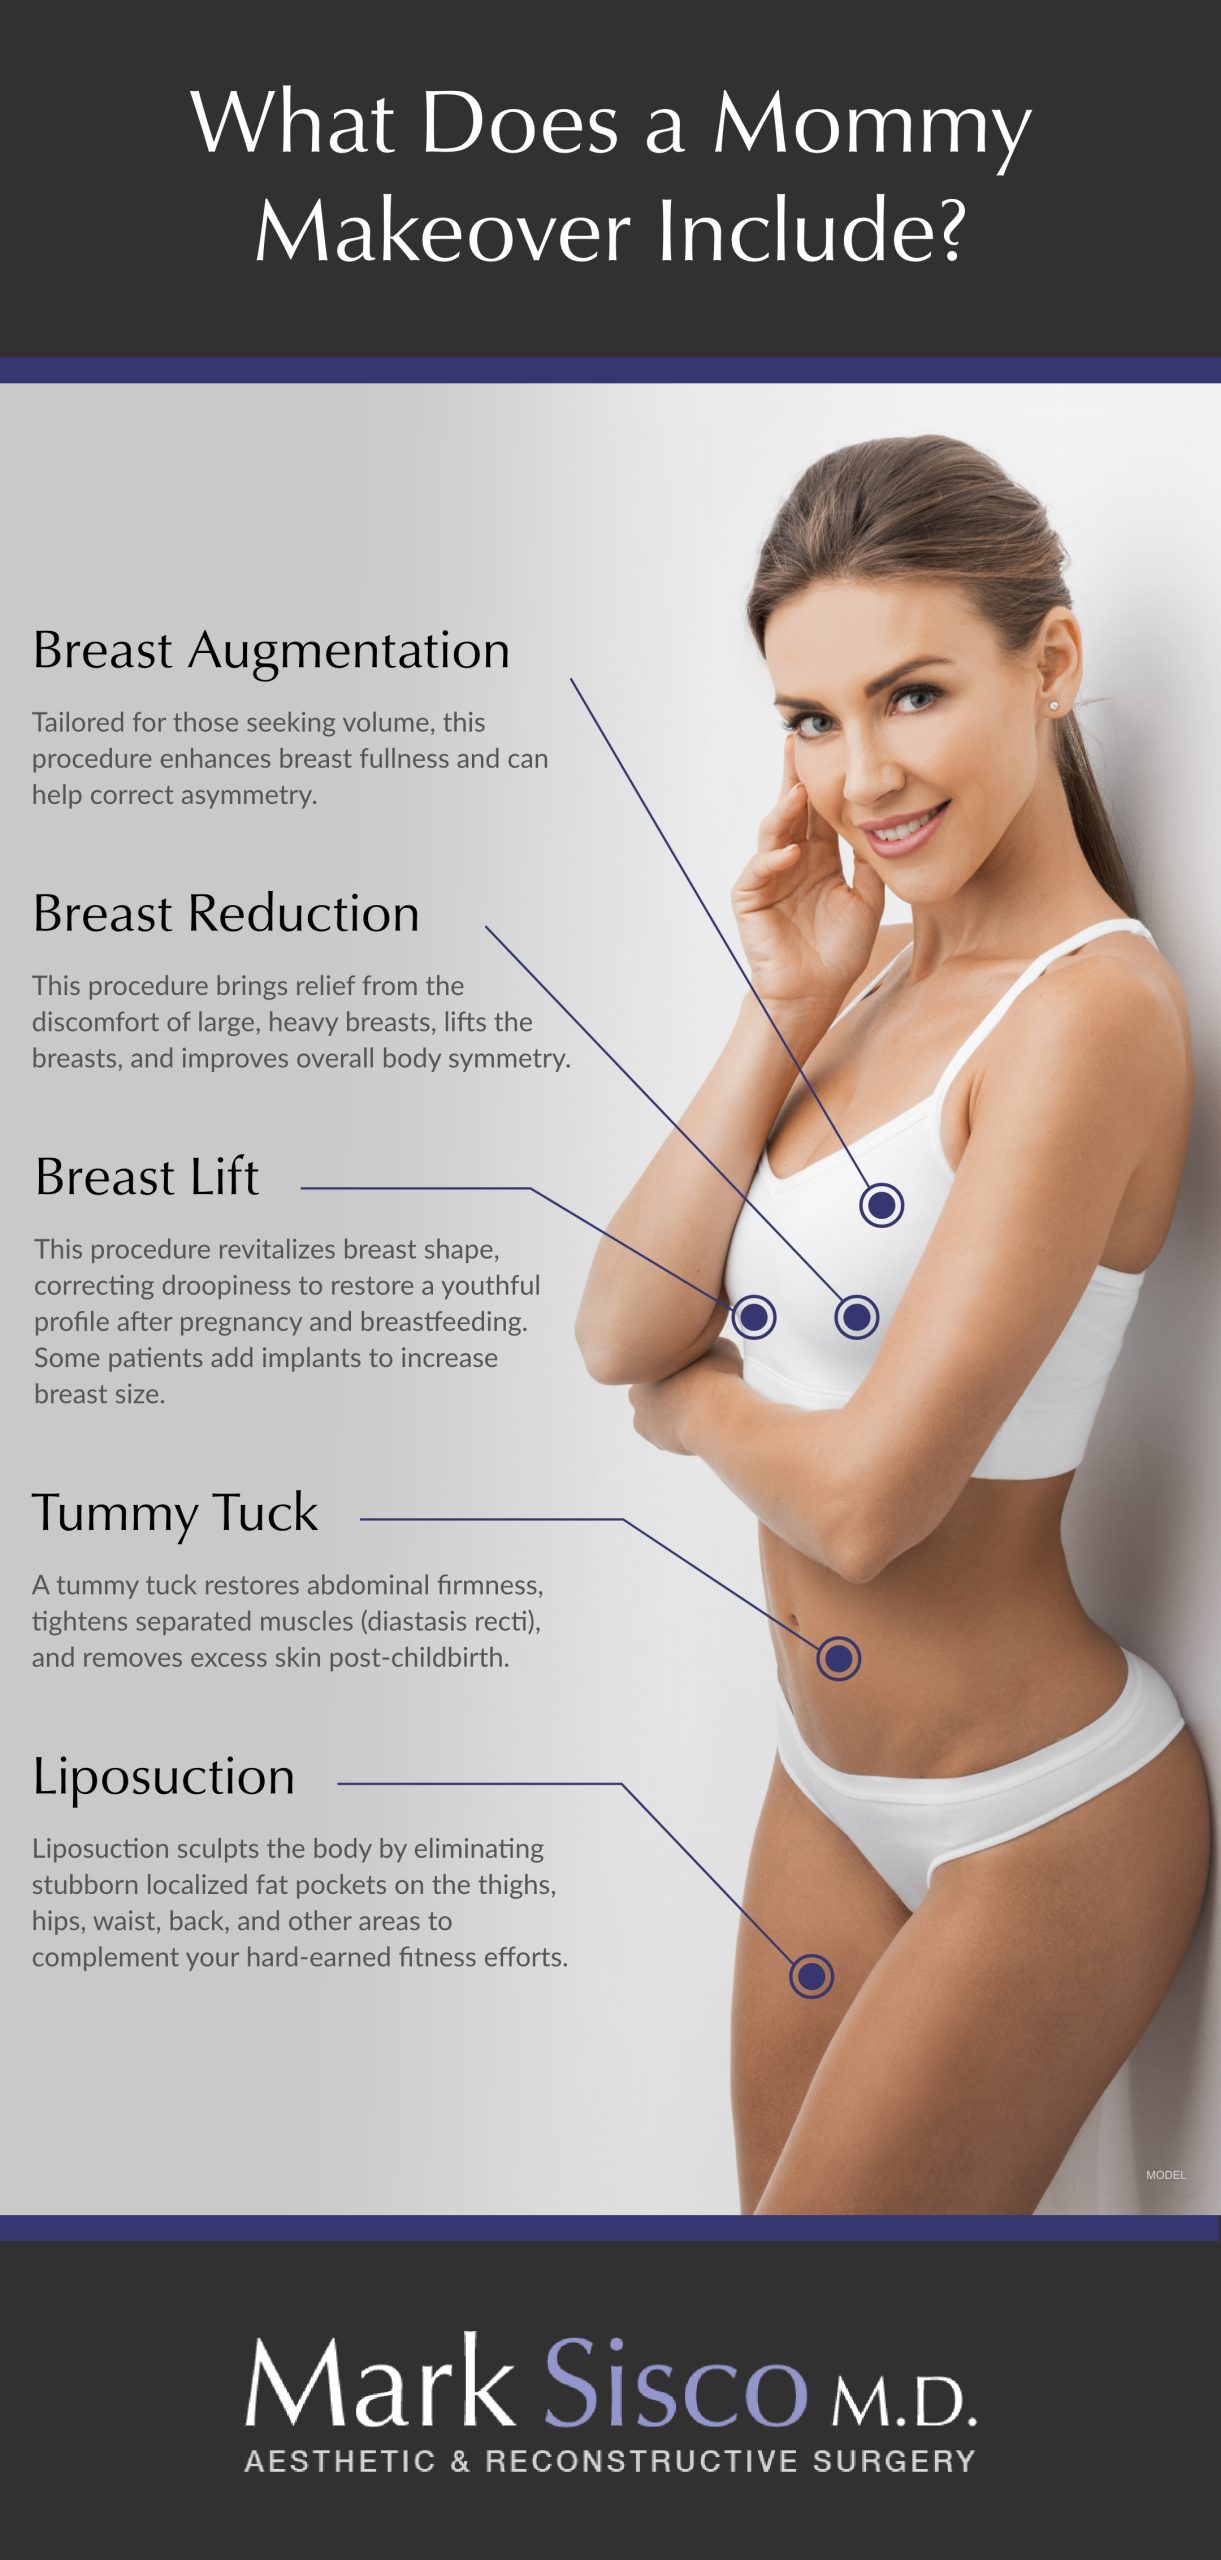 What Does a MommyMakeover Include? Breast Augmentation: Tailored for those seeking volume, this procedure enhances breast fullness and can help correct asymmetry. Breast Reduction This procedure brings relief from the discomfort of large, heavy breasts, lifts the breasts, and improves overall body symmetry. Breast Lift This procedure revitalizes breast shape, correcting droopiness to restore a youthful profile after pregnancy and breastfeeding. Some patients add implants to increase breast size. Tummy Tuck: A tummy tuck restores abdominal firmness, tightens separated muscles (diastasis recti), and removes excess skin post-childbirth. Liposuction Liposuction sculpts the body by eliminating stubborn localized fat pockets on the thighs, hips, waist, back, and other areas to complement your hard-earned fitness efforts. Woman (model) posing against a blank wall.